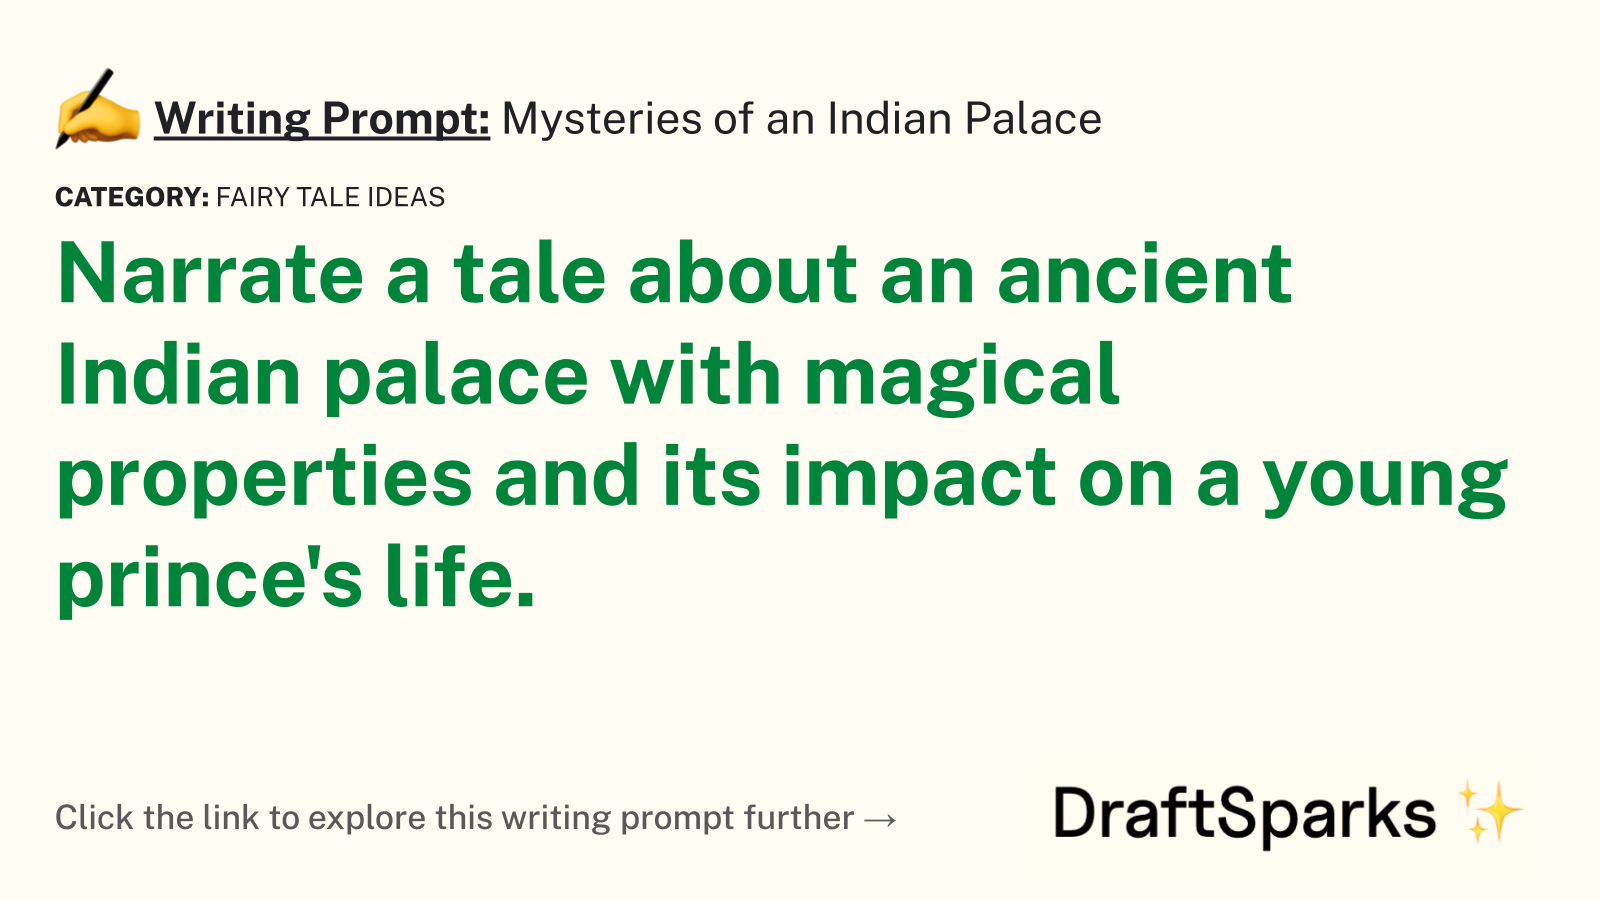 Mysteries of an Indian Palace